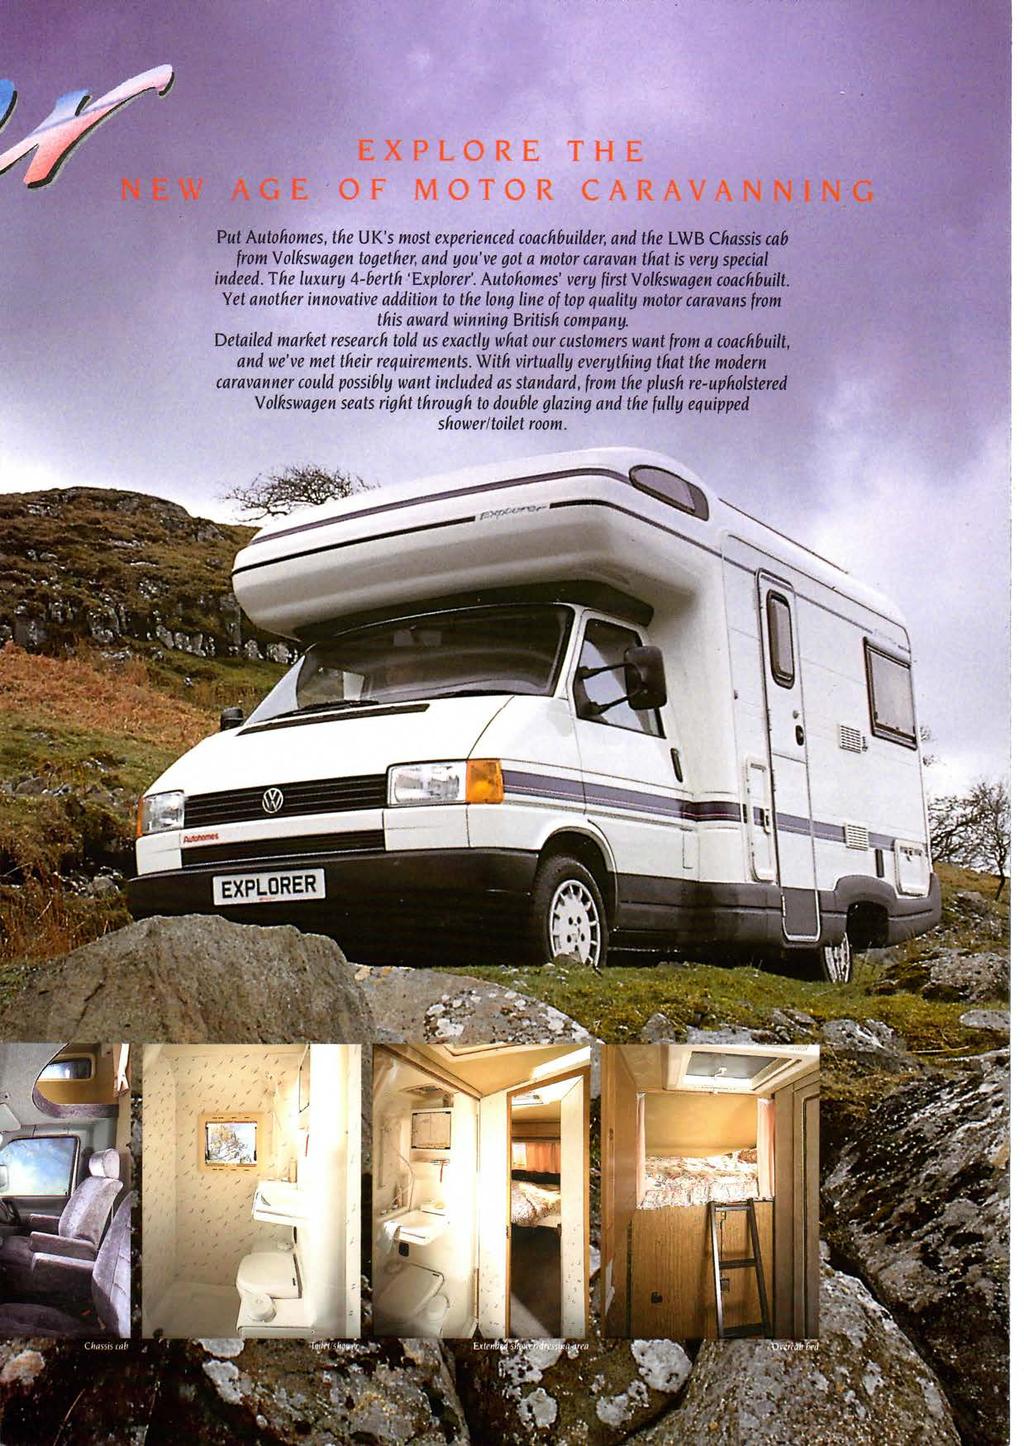 EXPLORE THE AGE OF MOTOR C A R A V A N N Put kutohomes, the UK's most experienced coachbuilder, and the LWB Chassis cab from Volkswagen together, and you've got a motor caravan that is very special